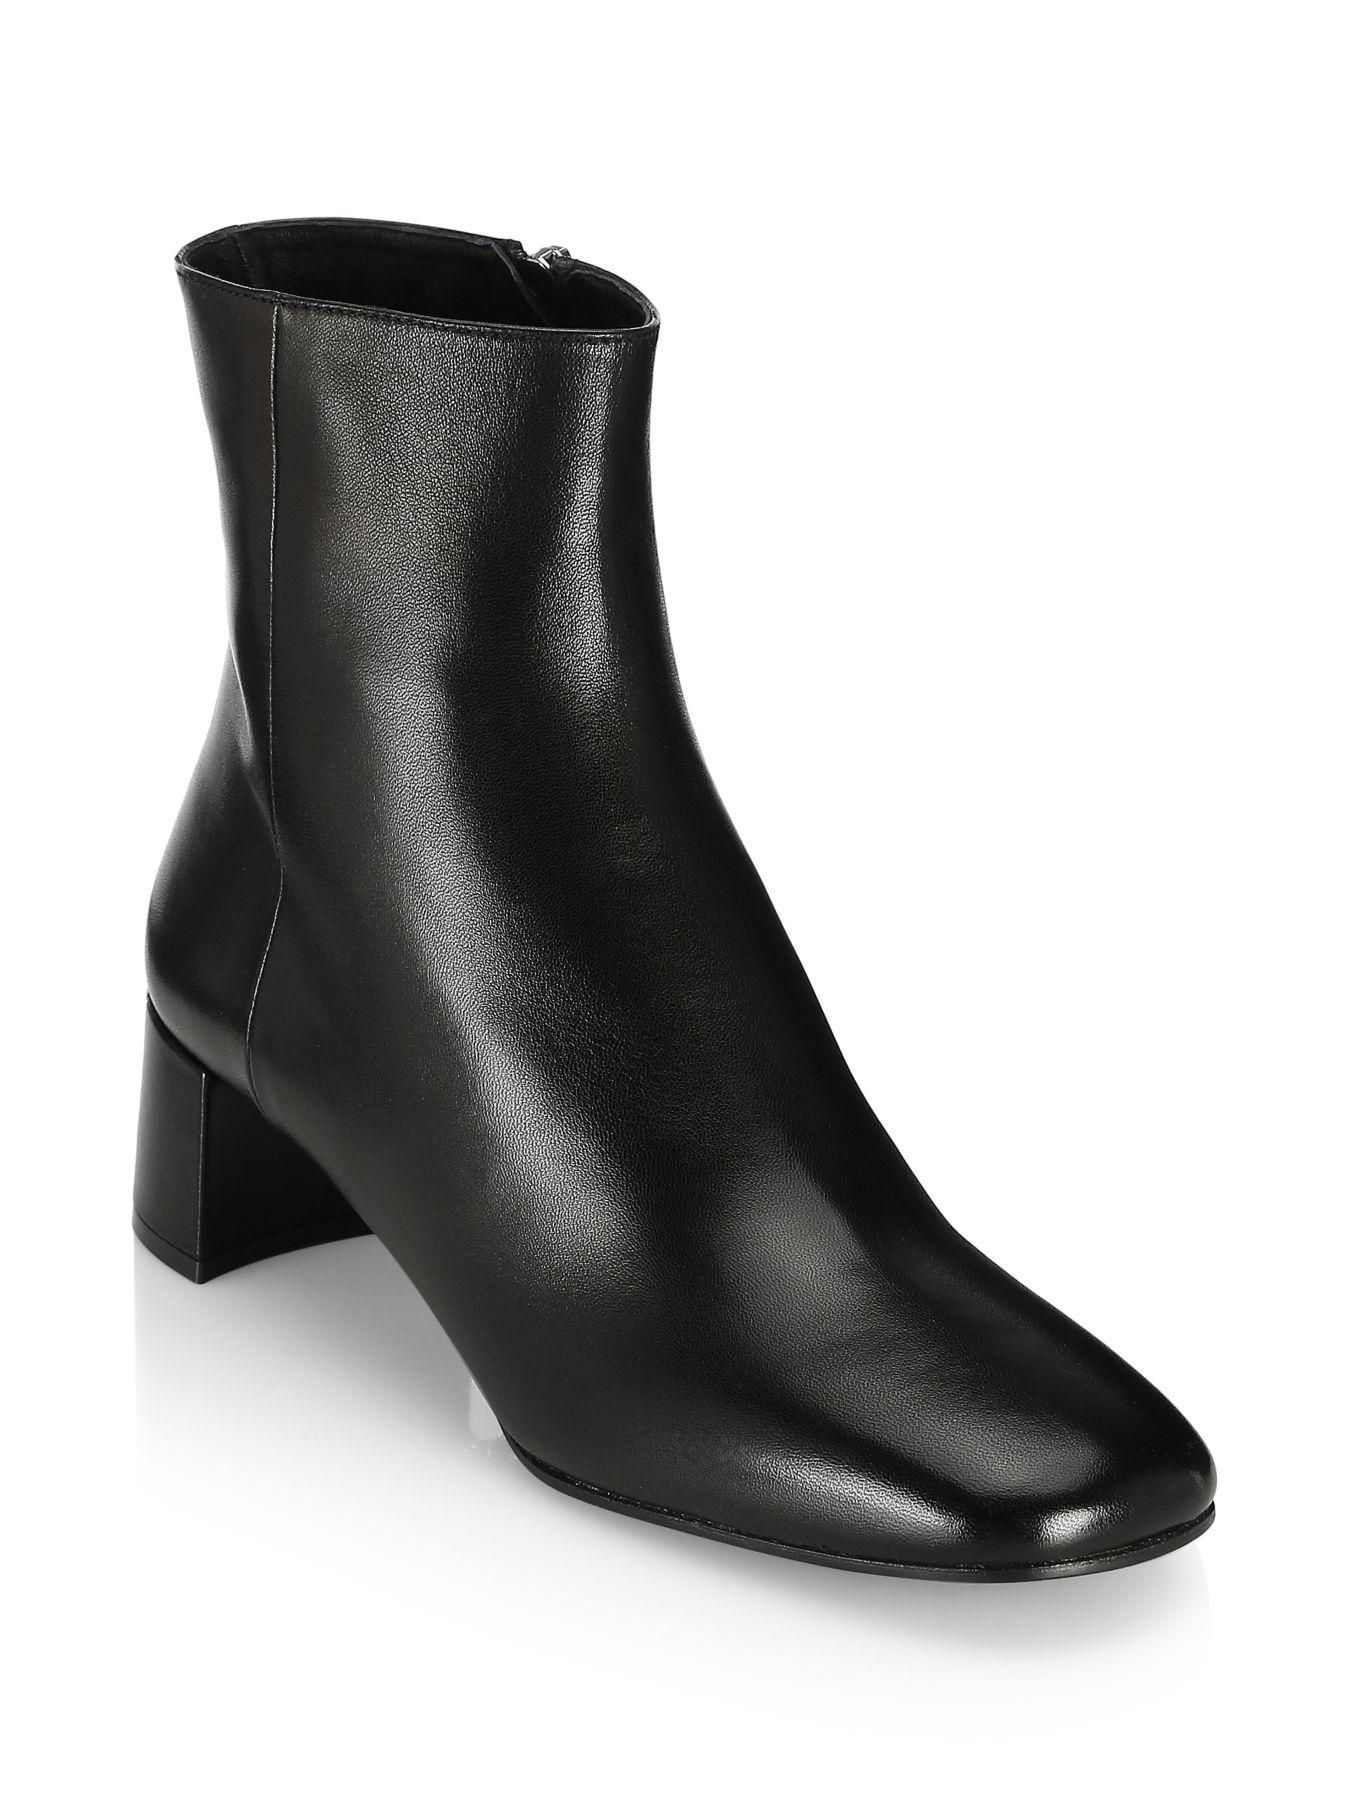 Prada Triangle Logo Leather Ankle Boots in Black | Lyst